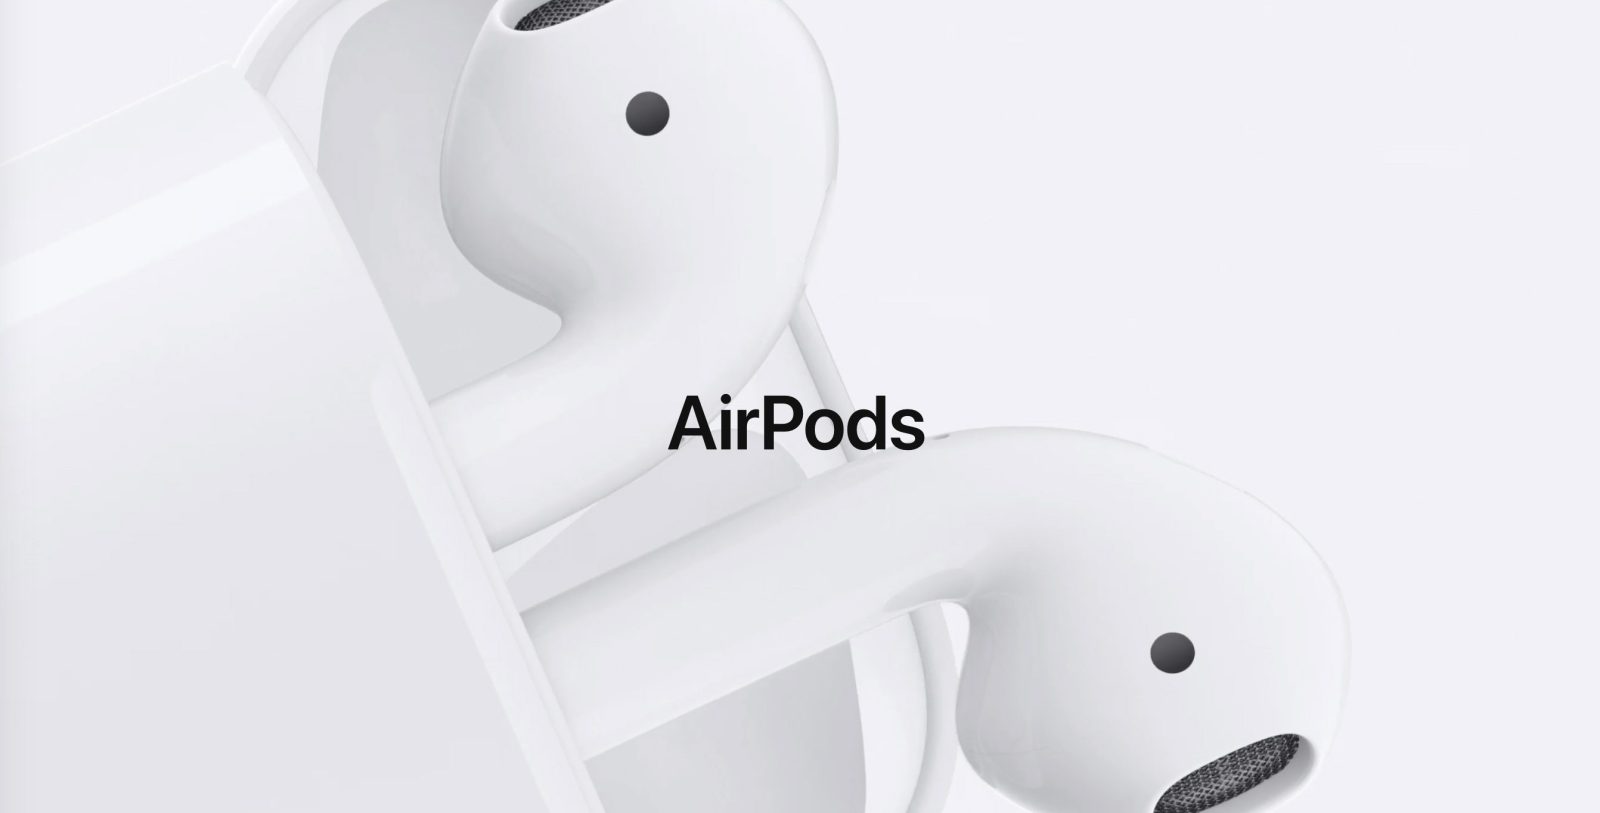 så meget tømmerflåde klar Kuo: 'All-new design' AirPods in 2020, wireless charging model in first  quarter 2019 - 9to5Mac